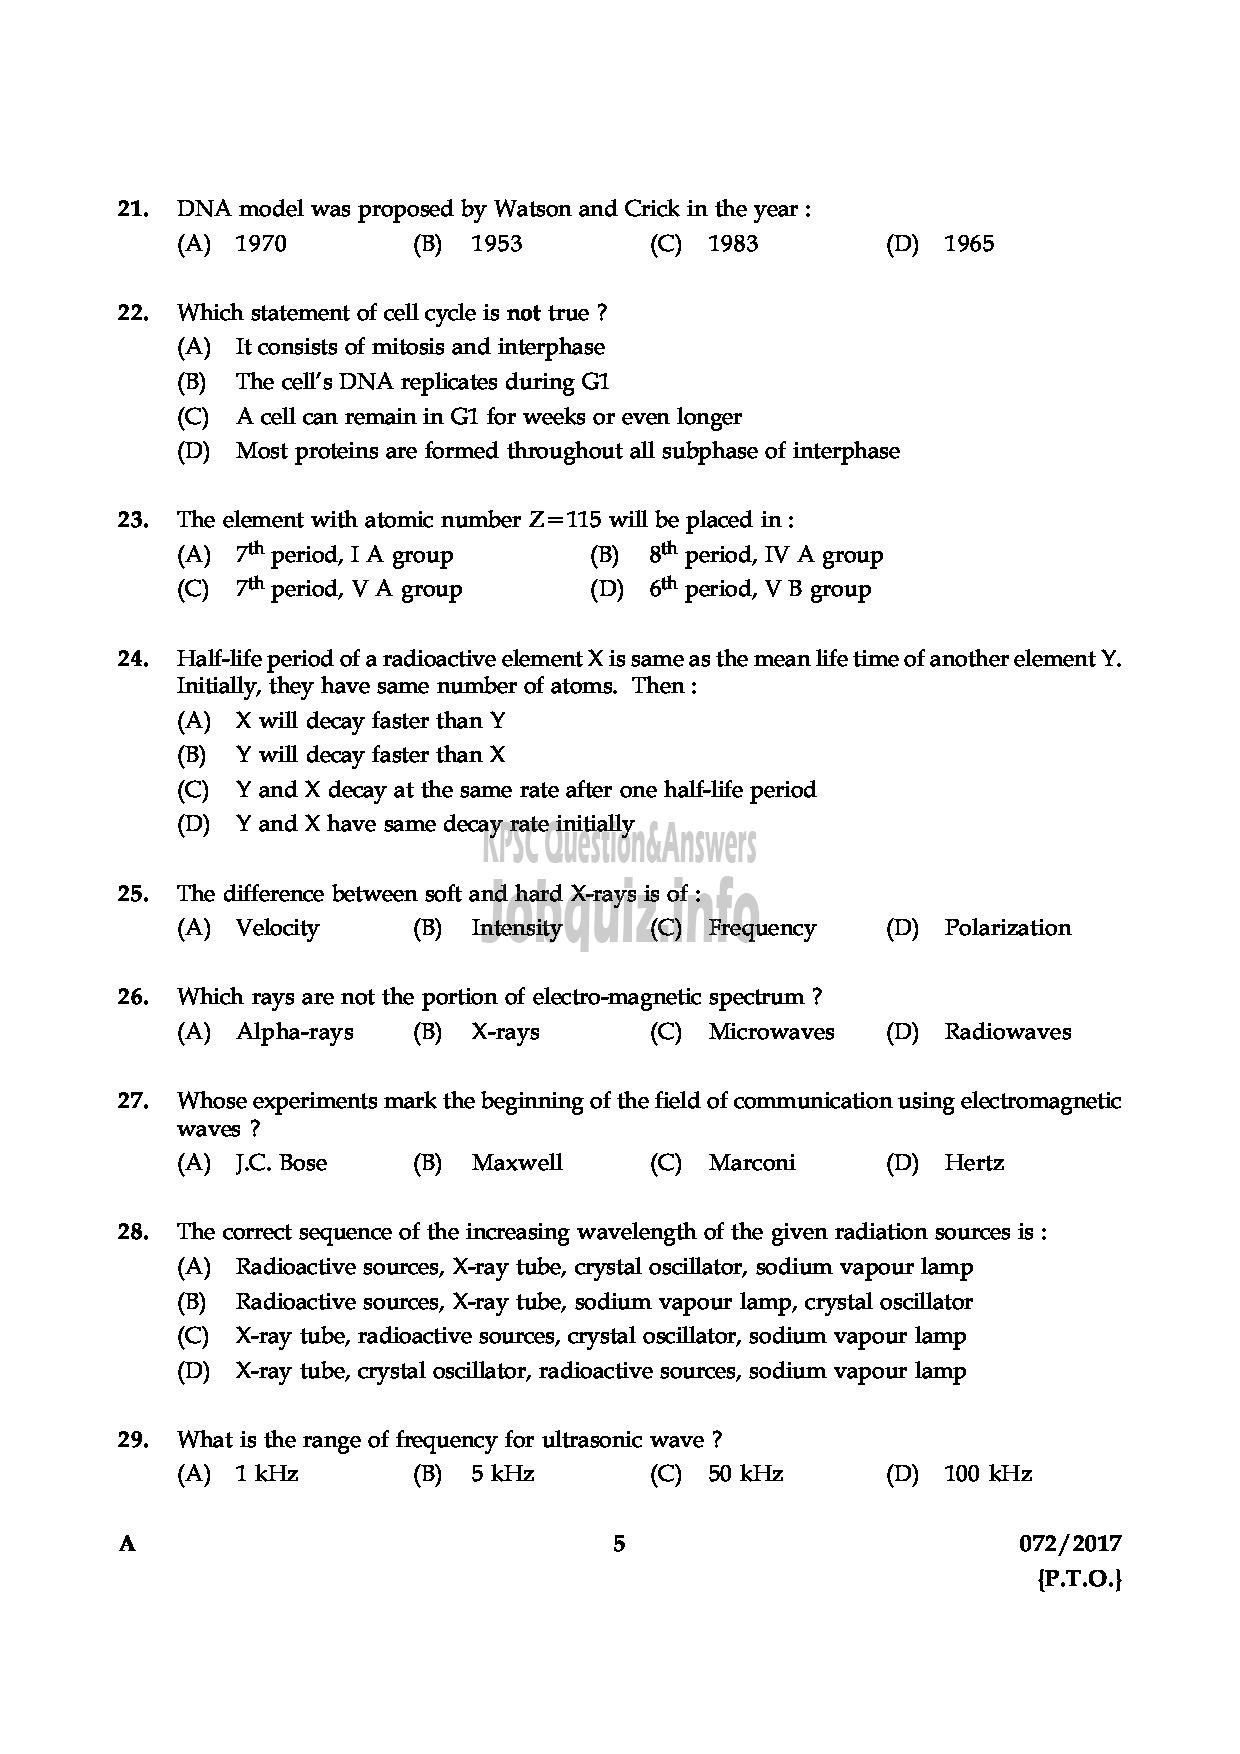 Kerala PSC Question Paper - RADIOGRAPHER GR.II HEALTH SERVICES QUESTION PAPER-4